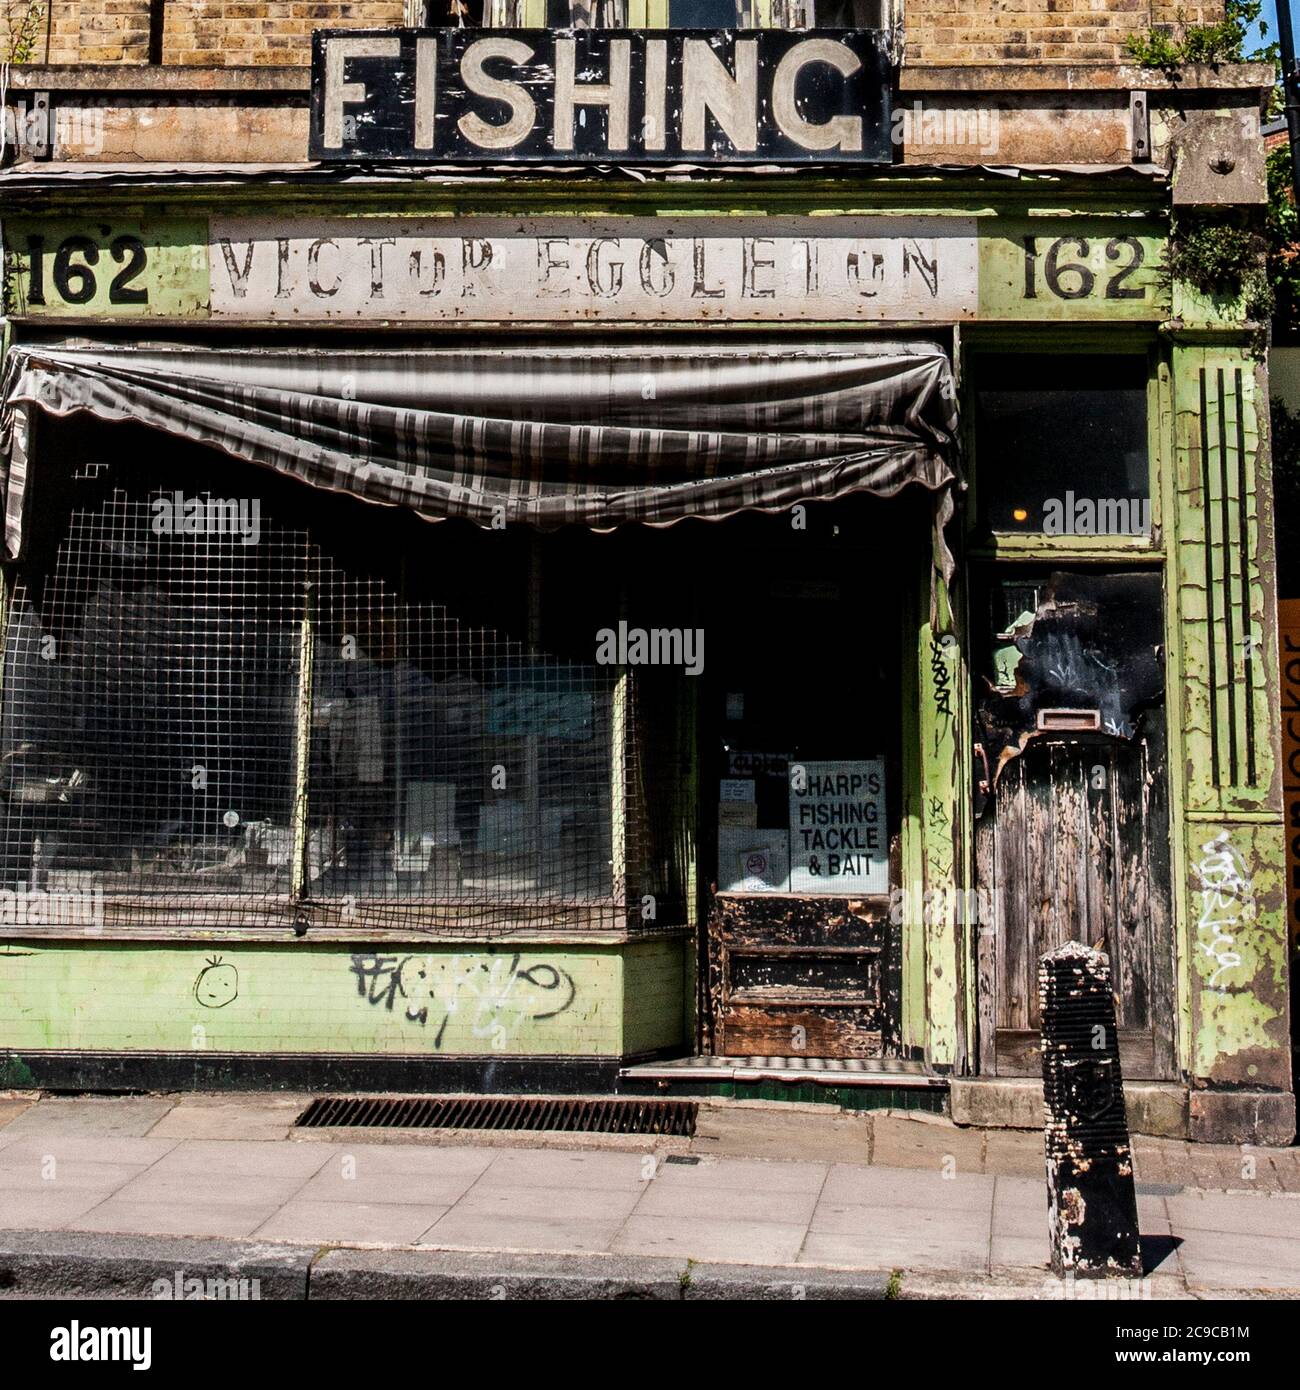 Fishing tackle shop, Malden Road run down weather battered fishing tackle and bait shop Stock Photo